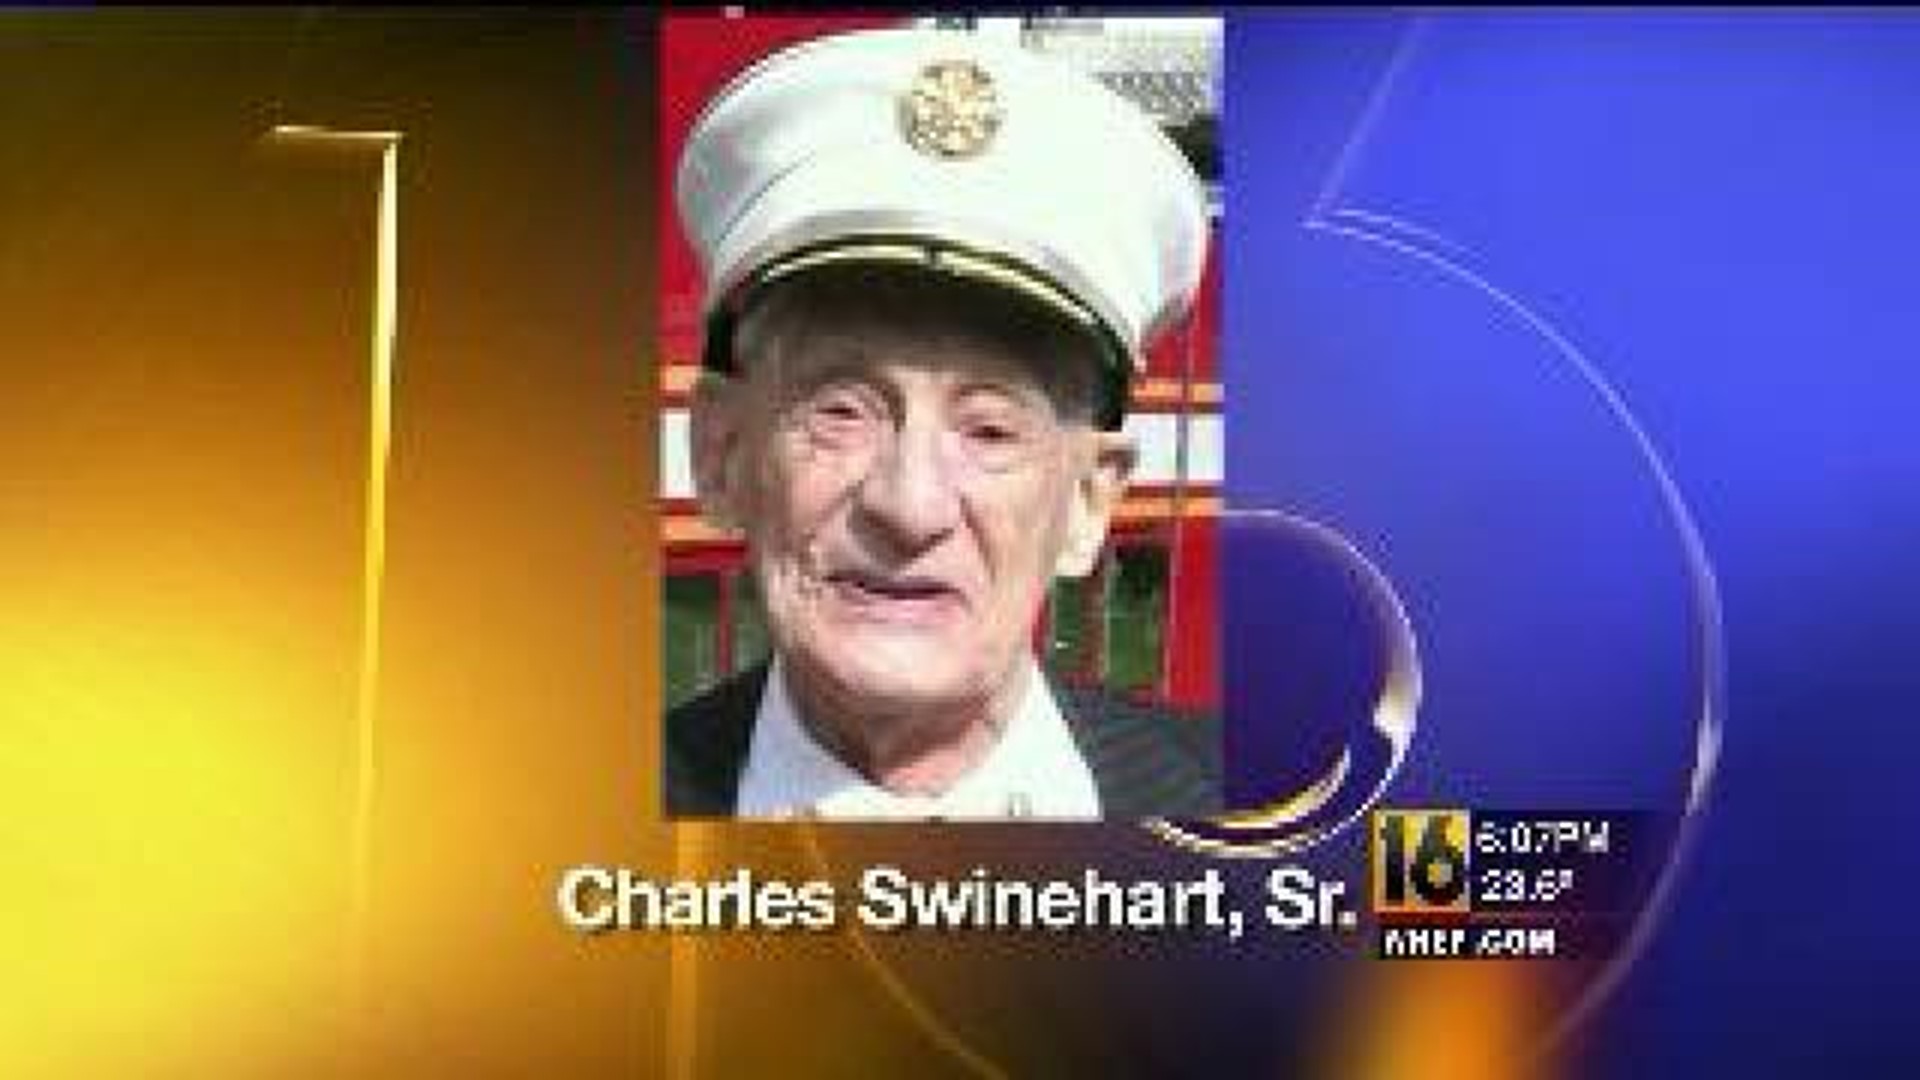 Paying Tribute to One-Time Fire Chief